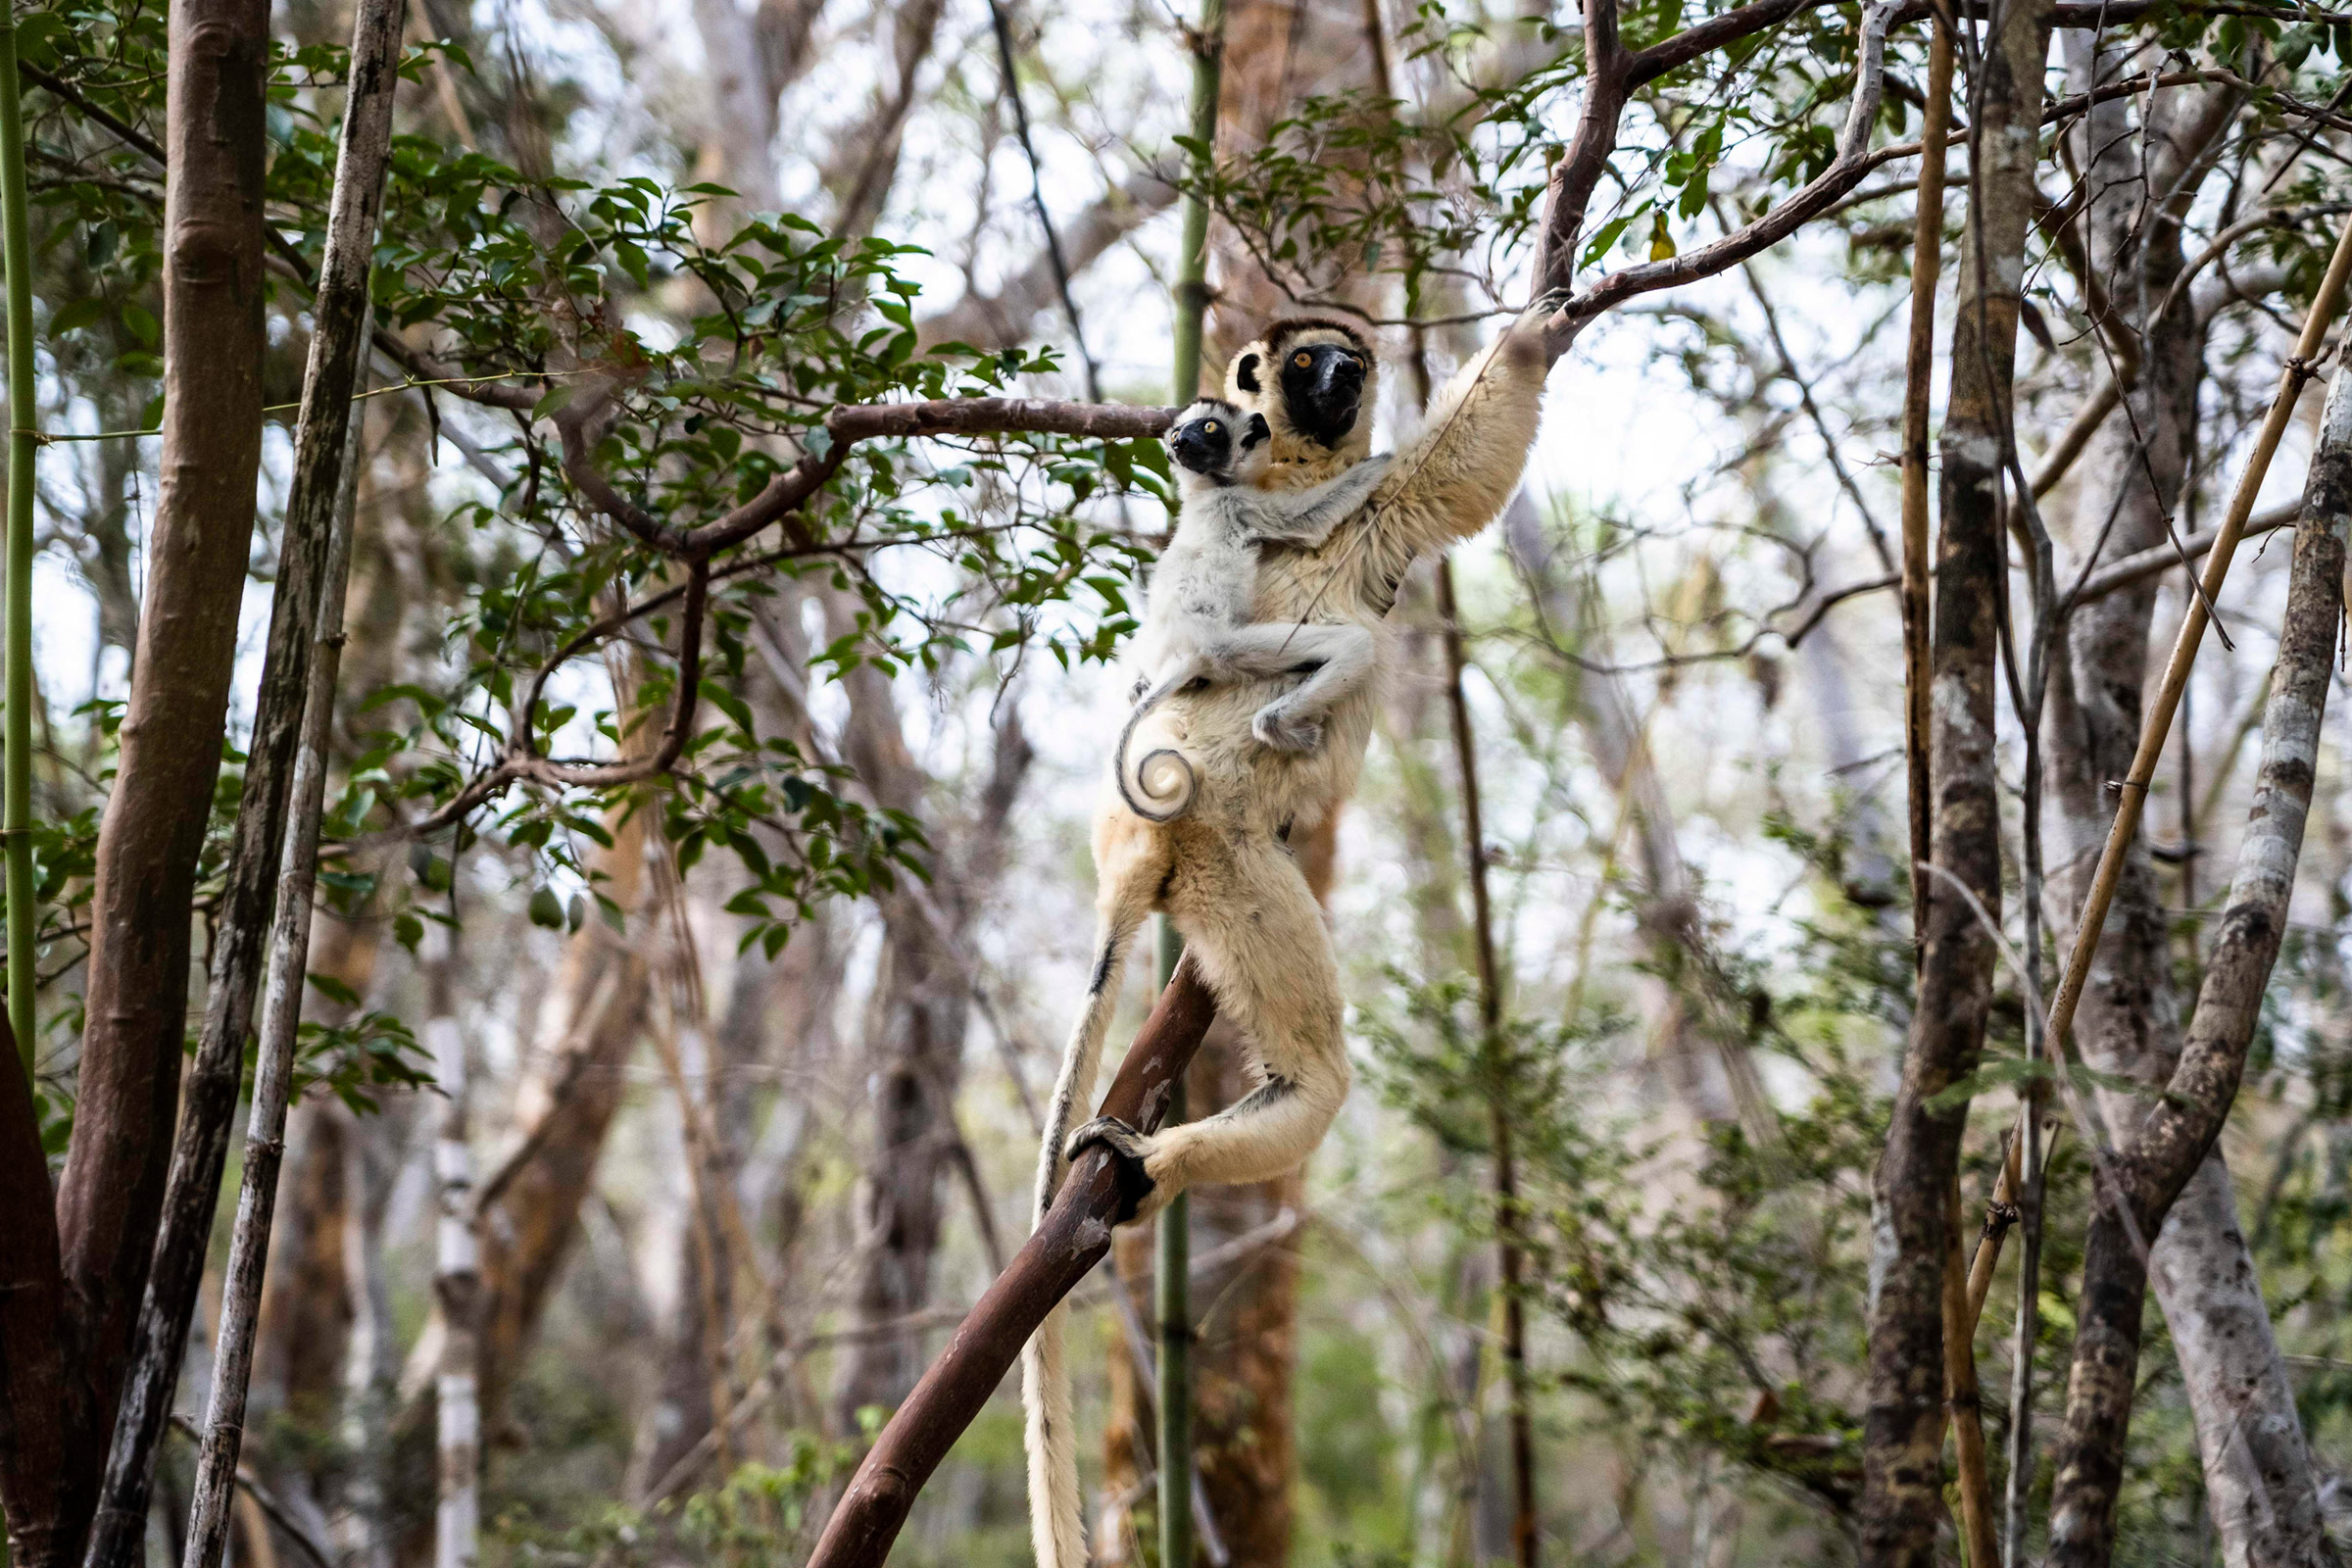 Lemurs in Kirindy Forest, a private reserve along Madagascar's west coast that has suffered profound deforestation in recent years, on Nov. 23, 2019. (Andy Isaacson)